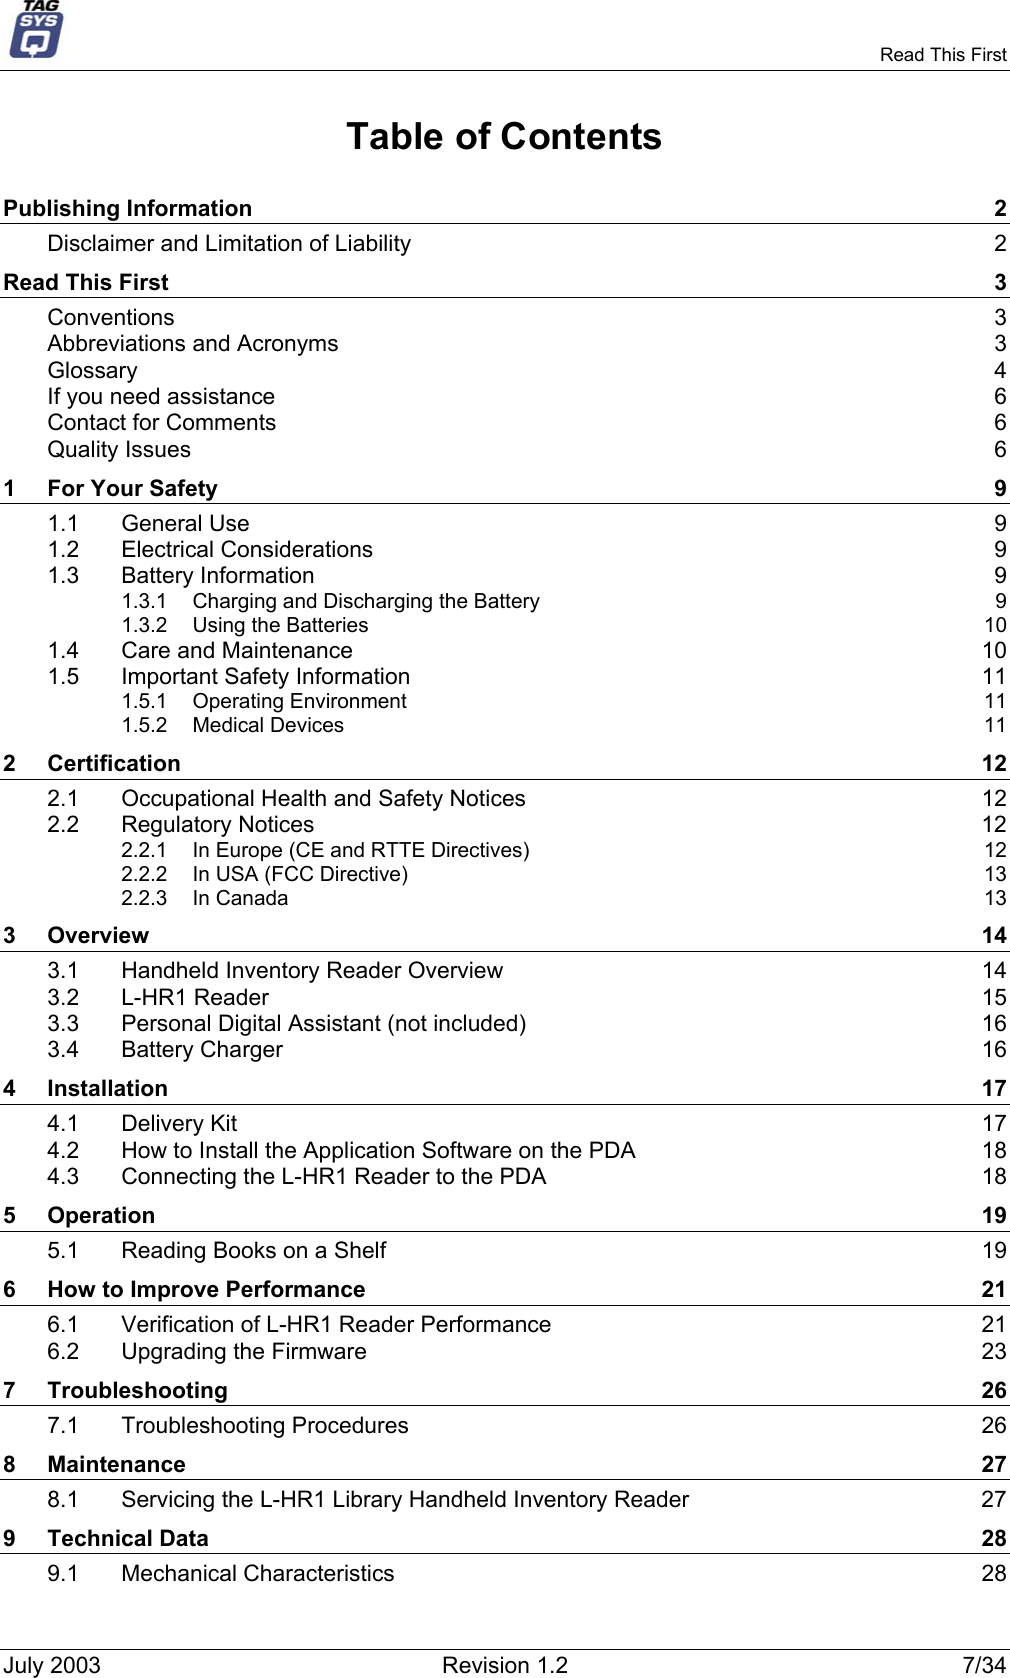     Read This First Table of Contents Publishing Information  2 Disclaimer and Limitation of Liability  2 Read This First  3 Conventions  3 Abbreviations and Acronyms  3 Glossary  4 If you need assistance  6 Contact for Comments  6 Quality Issues  6 1 For Your Safety  9 1.1 General Use  9 1.2 Electrical Considerations  9 1.3 Battery Information  9 1.3.1 Charging and Discharging the Battery  9 1.3.2 Using the Batteries  10 1.4 Care and Maintenance  10 1.5 Important Safety Information  11 1.5.1 Operating Environment  11 1.5.2 Medical Devices  11 2 Certification  12 2.1 Occupational Health and Safety Notices  12 2.2 Regulatory Notices  12 2.2.1 In Europe (CE and RTTE Directives)  12 2.2.2 In USA (FCC Directive)  13 2.2.3 In Canada  13 3 Overview  14 3.1 Handheld Inventory Reader Overview  14 3.2 L-HR1 Reader  15 3.3 Personal Digital Assistant (not included)  16 3.4 Battery Charger  16 4 Installation  17 4.1 Delivery Kit  17 4.2 How to Install the Application Software on the PDA  18 4.3 Connecting the L-HR1 Reader to the PDA  18 5 Operation  19 5.1 Reading Books on a Shelf  19 6 How to Improve Performance  21 6.1 Verification of L-HR1 Reader Performance  21 6.2 Upgrading the Firmware  23 7 Troubleshooting  26 7.1 Troubleshooting Procedures  26 8 Maintenance  27 8.1 Servicing the L-HR1 Library Handheld Inventory Reader  27 9 Technical Data  28 9.1 Mechanical Characteristics  28 July 2003  Revision 1.2  7/34 